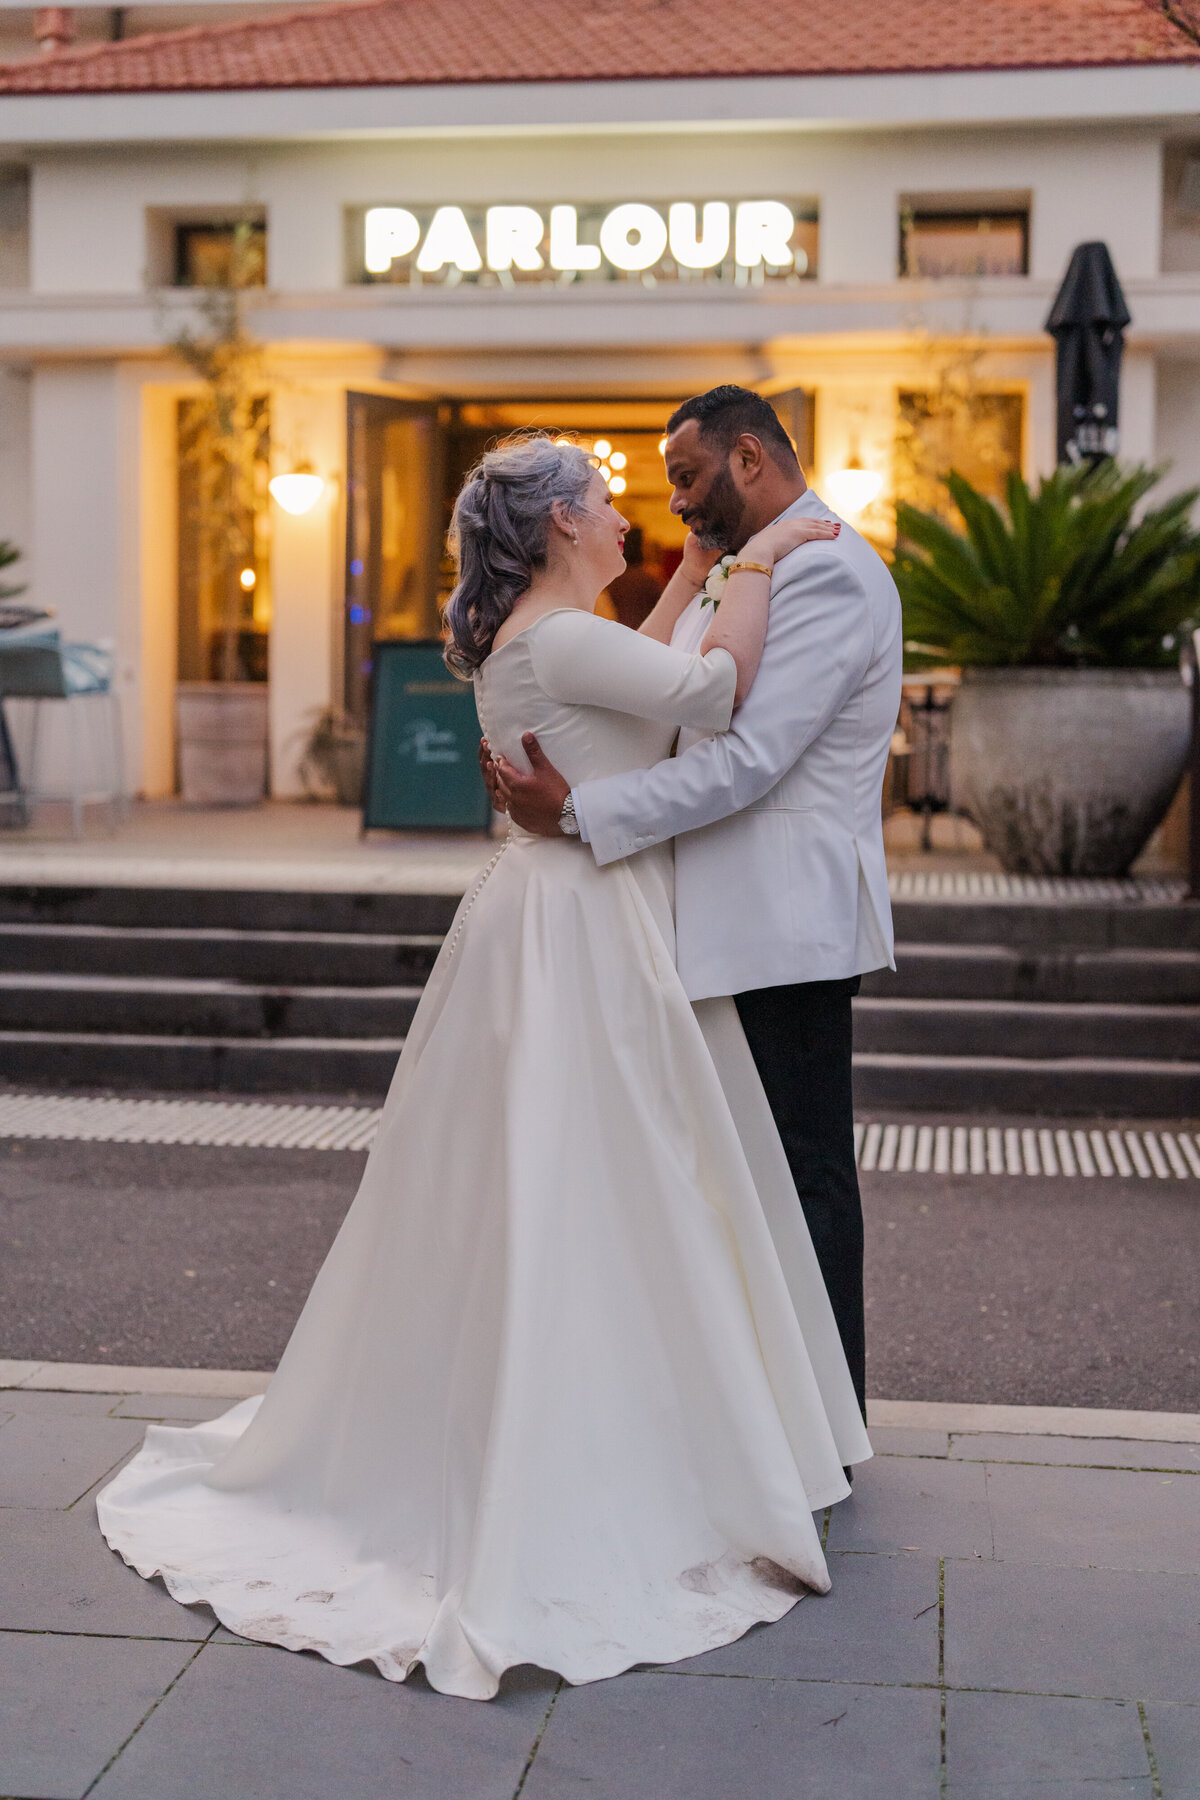 Bride and groom photos in Canberra